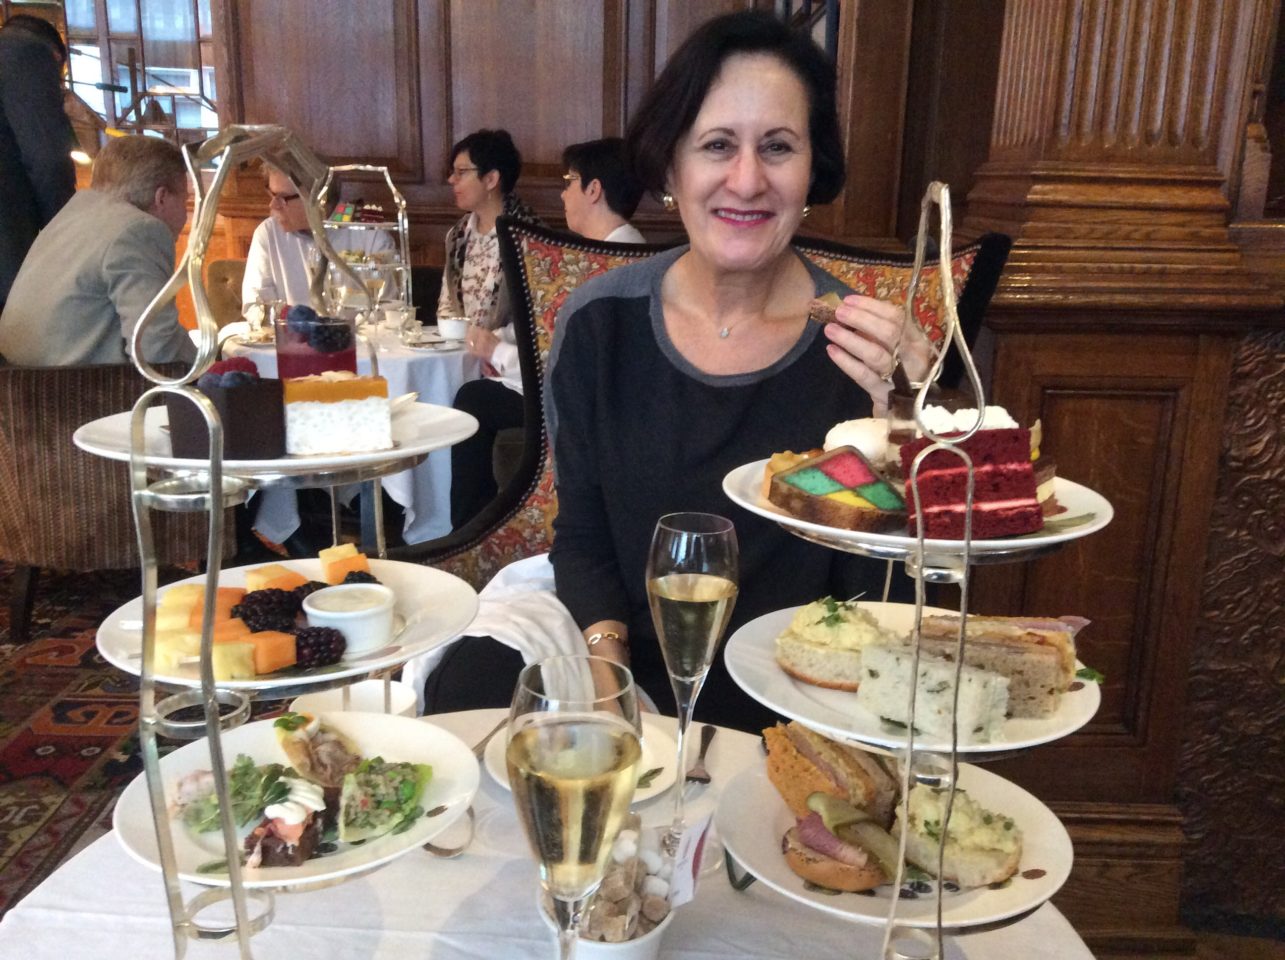 Afternoon Tea at The English Tea Room of Brown's Hotel in London